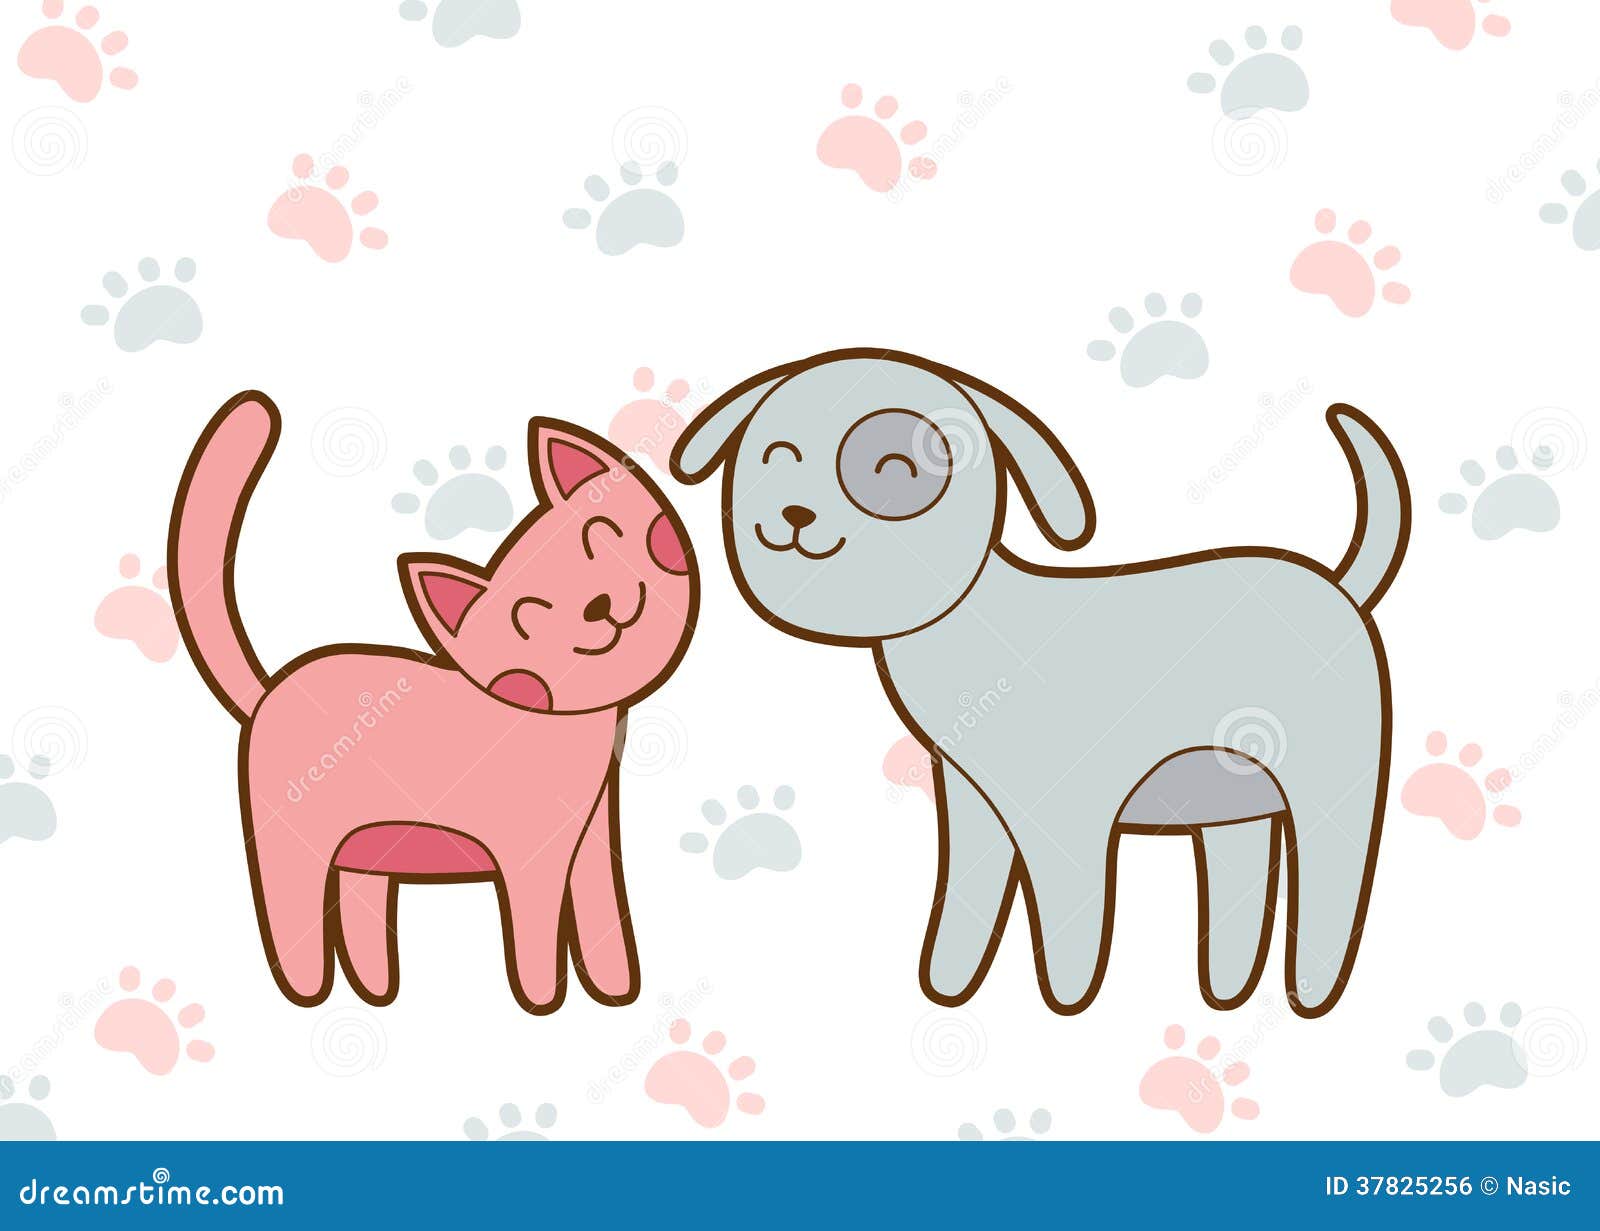 Simple Cat And Dog Drawing